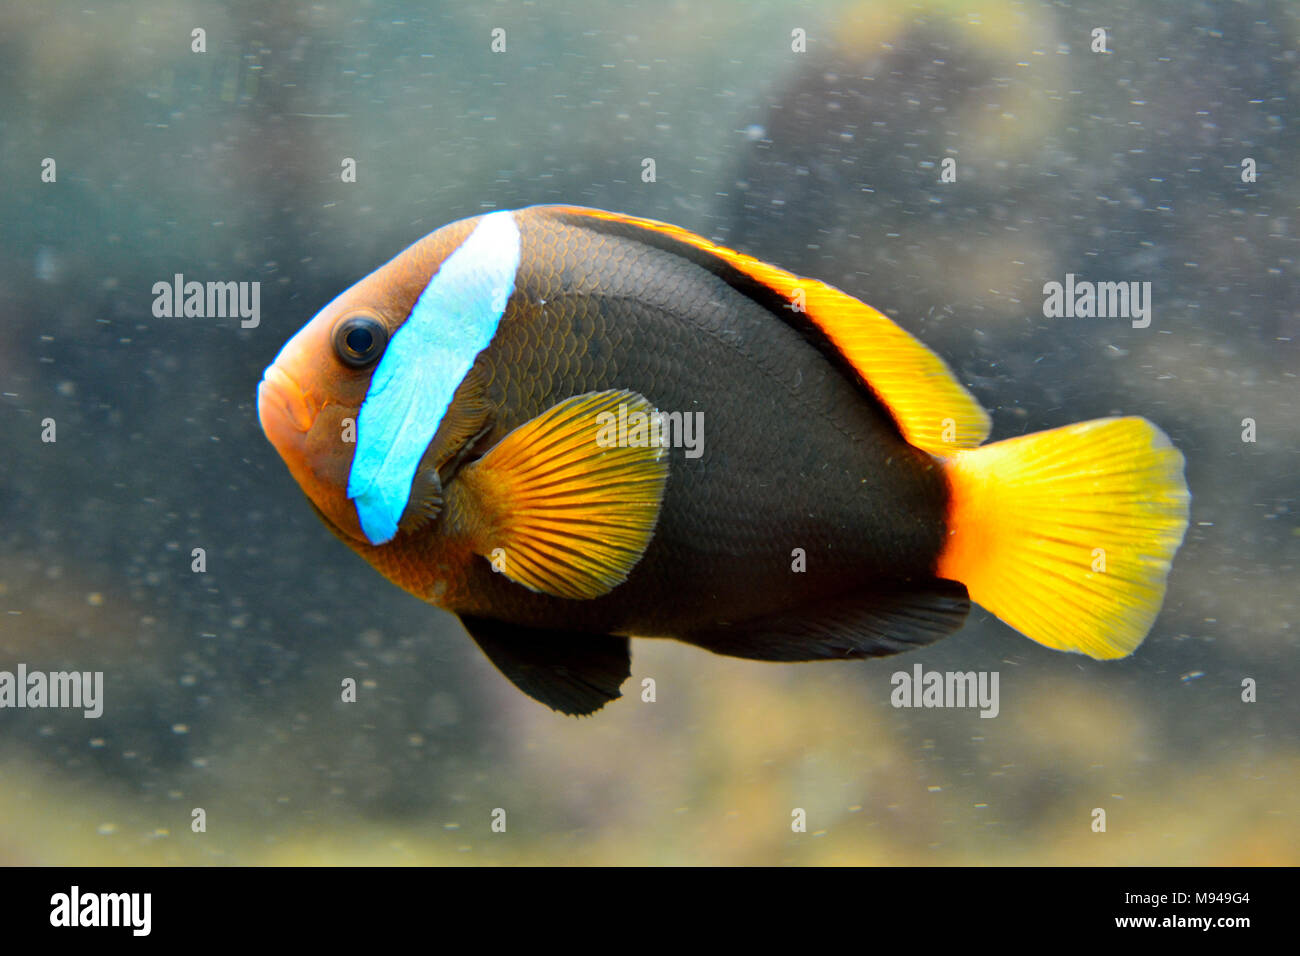 Cinnamon clownfish (Amphiprion melanopus) is a widely distributed anemonefish chiefly found in the western and southern parts of the Pacific Ocean. Stock Photo